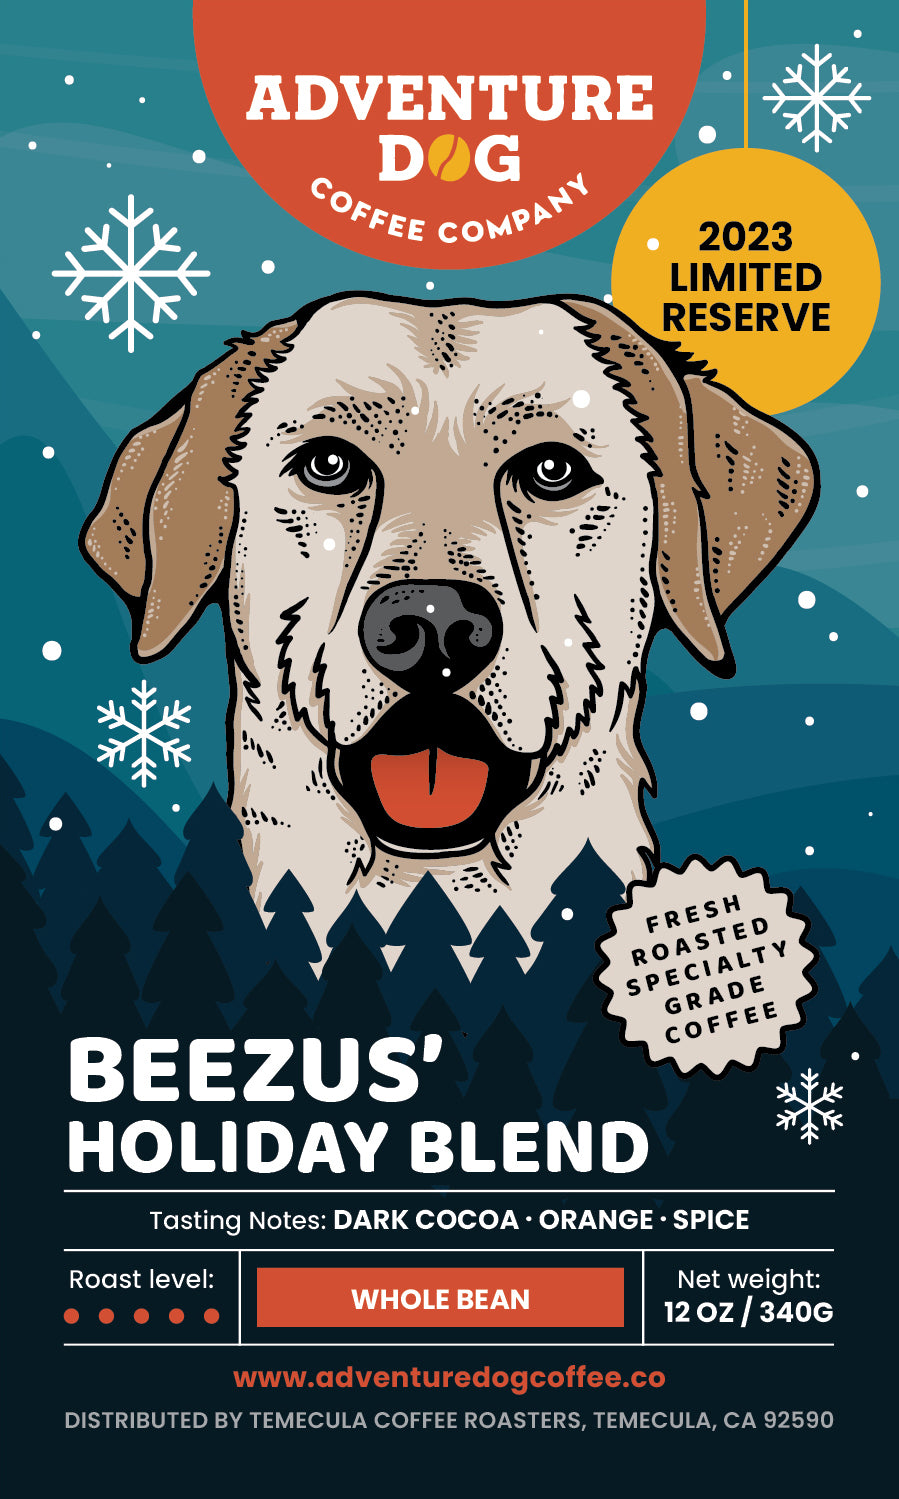 Beezus Holiday Blend 2023 Limited Reserve Coffee label. Featuring an illustration of Seeing Eye dog Beezus. Tasting notes of dark cocoa, orange, and spice.